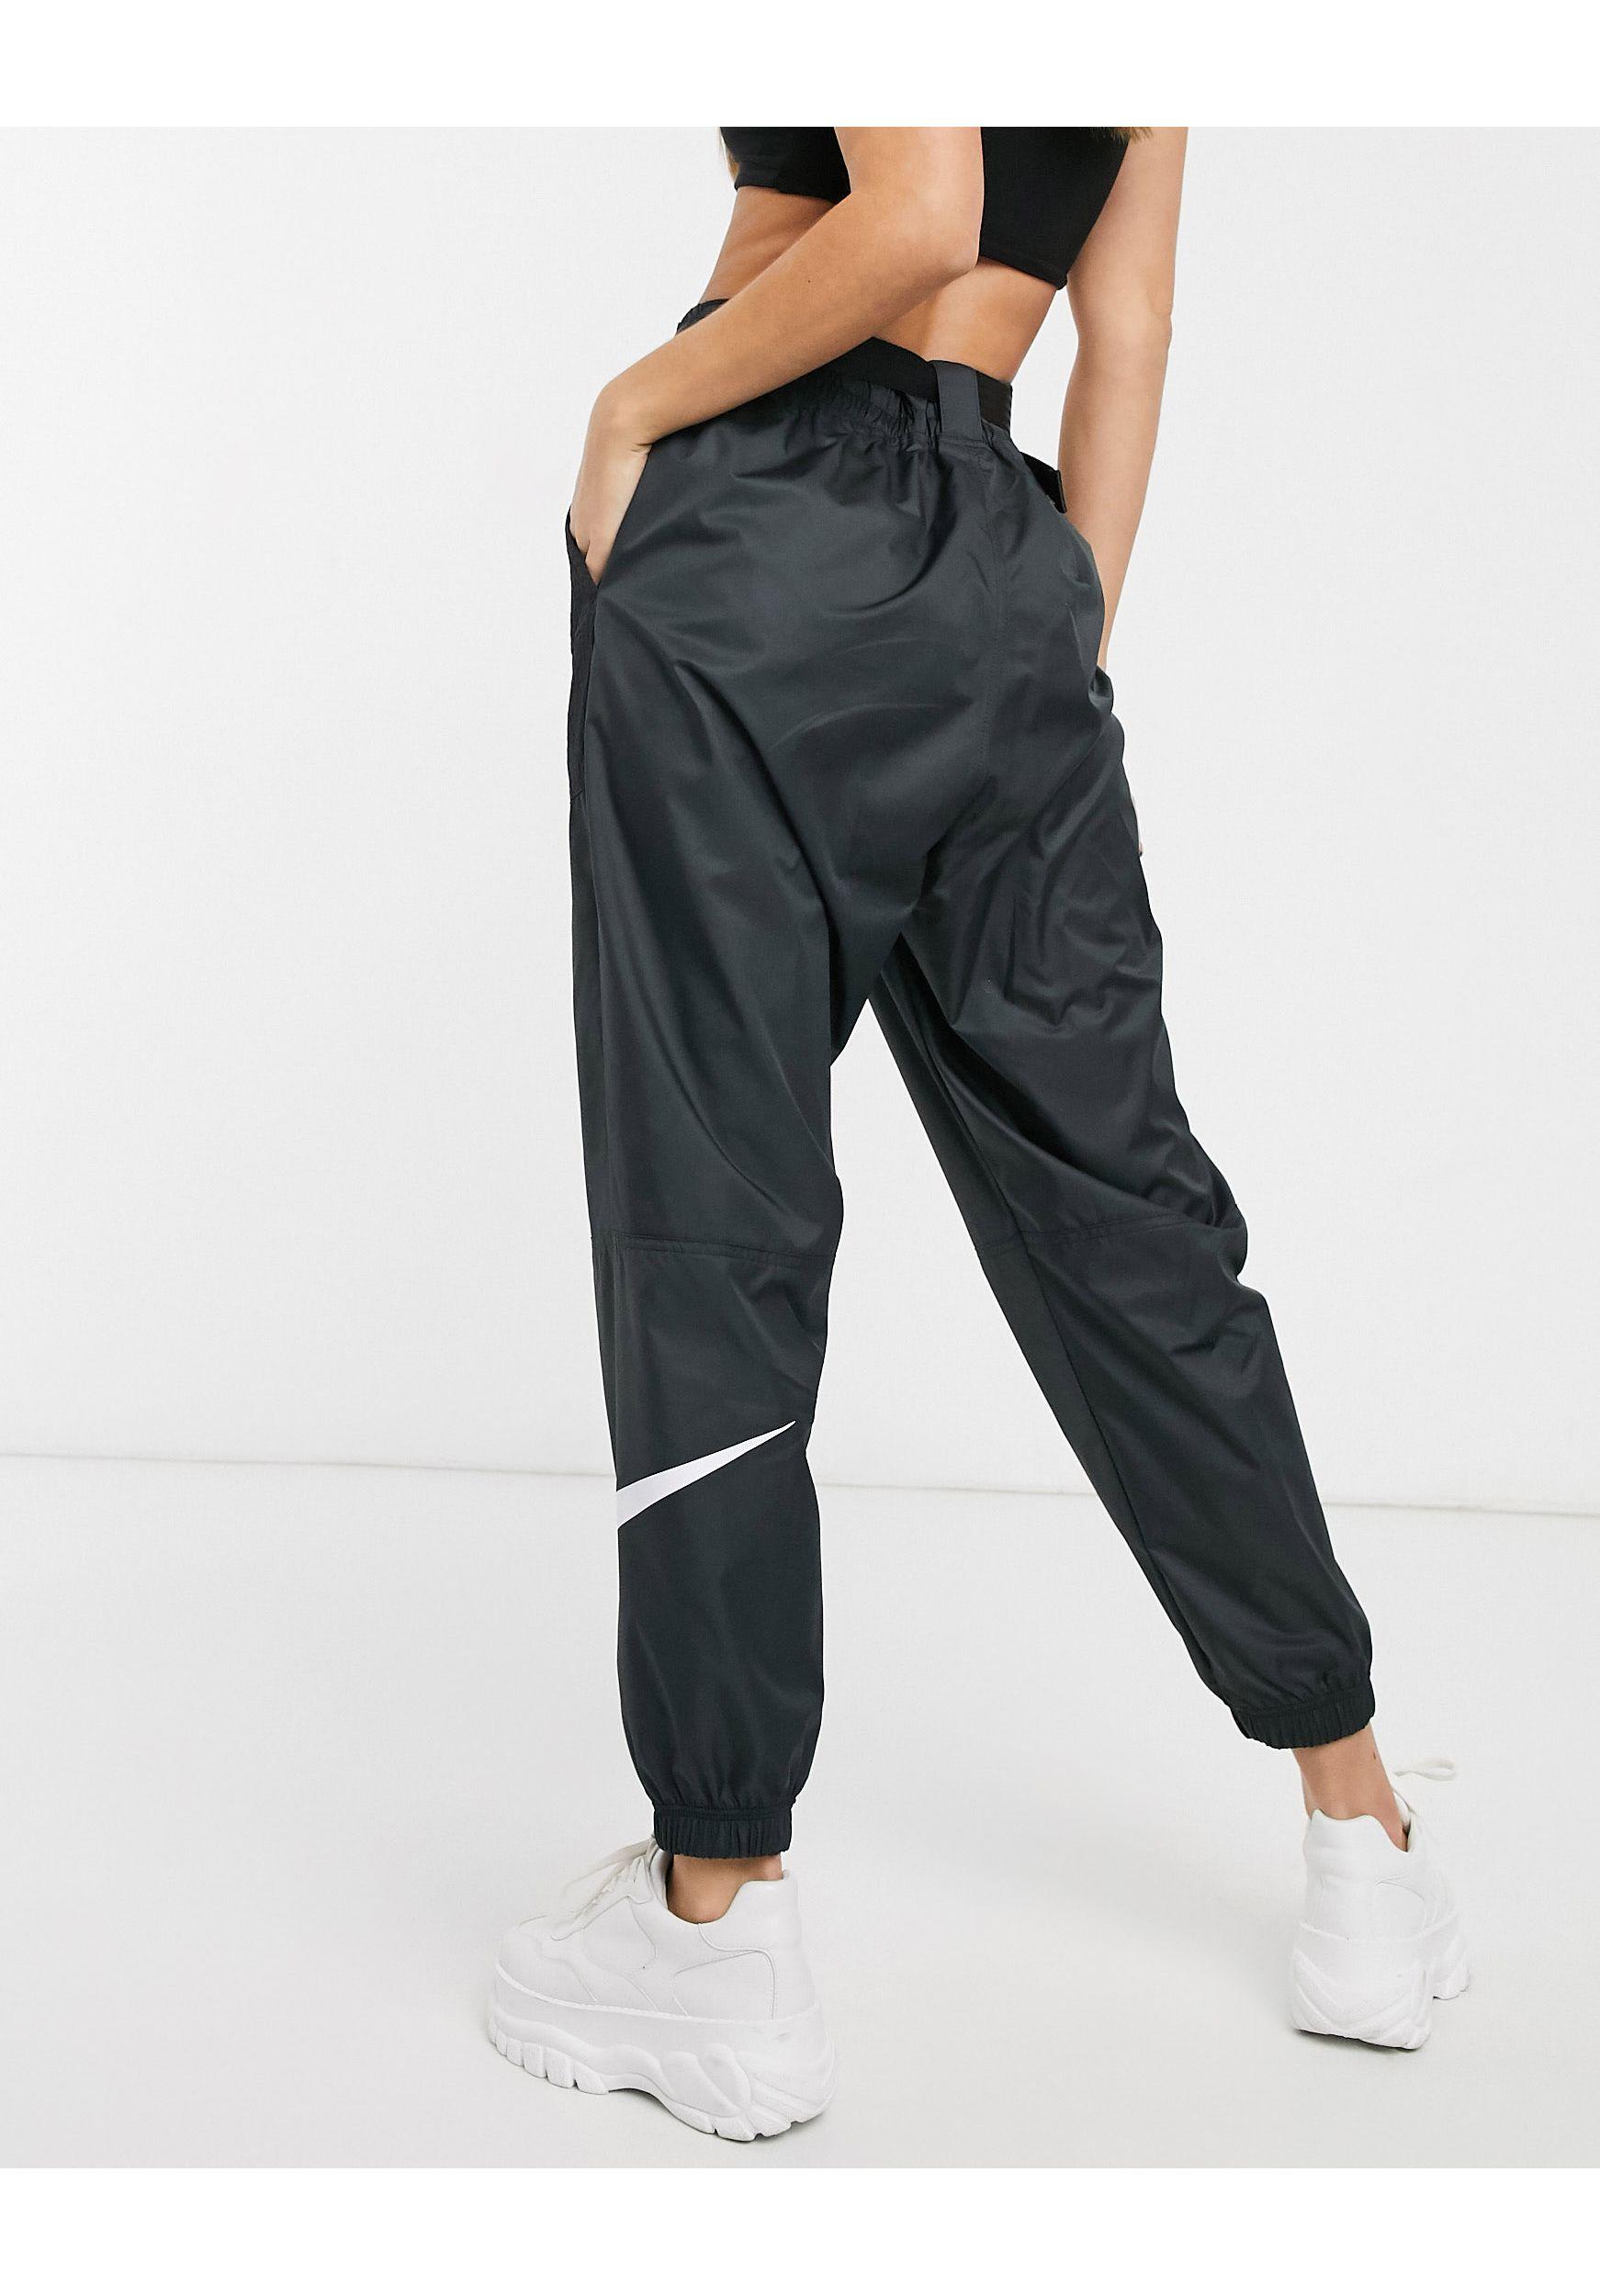 Nike Synthetic Woven Swoosh Pant in 